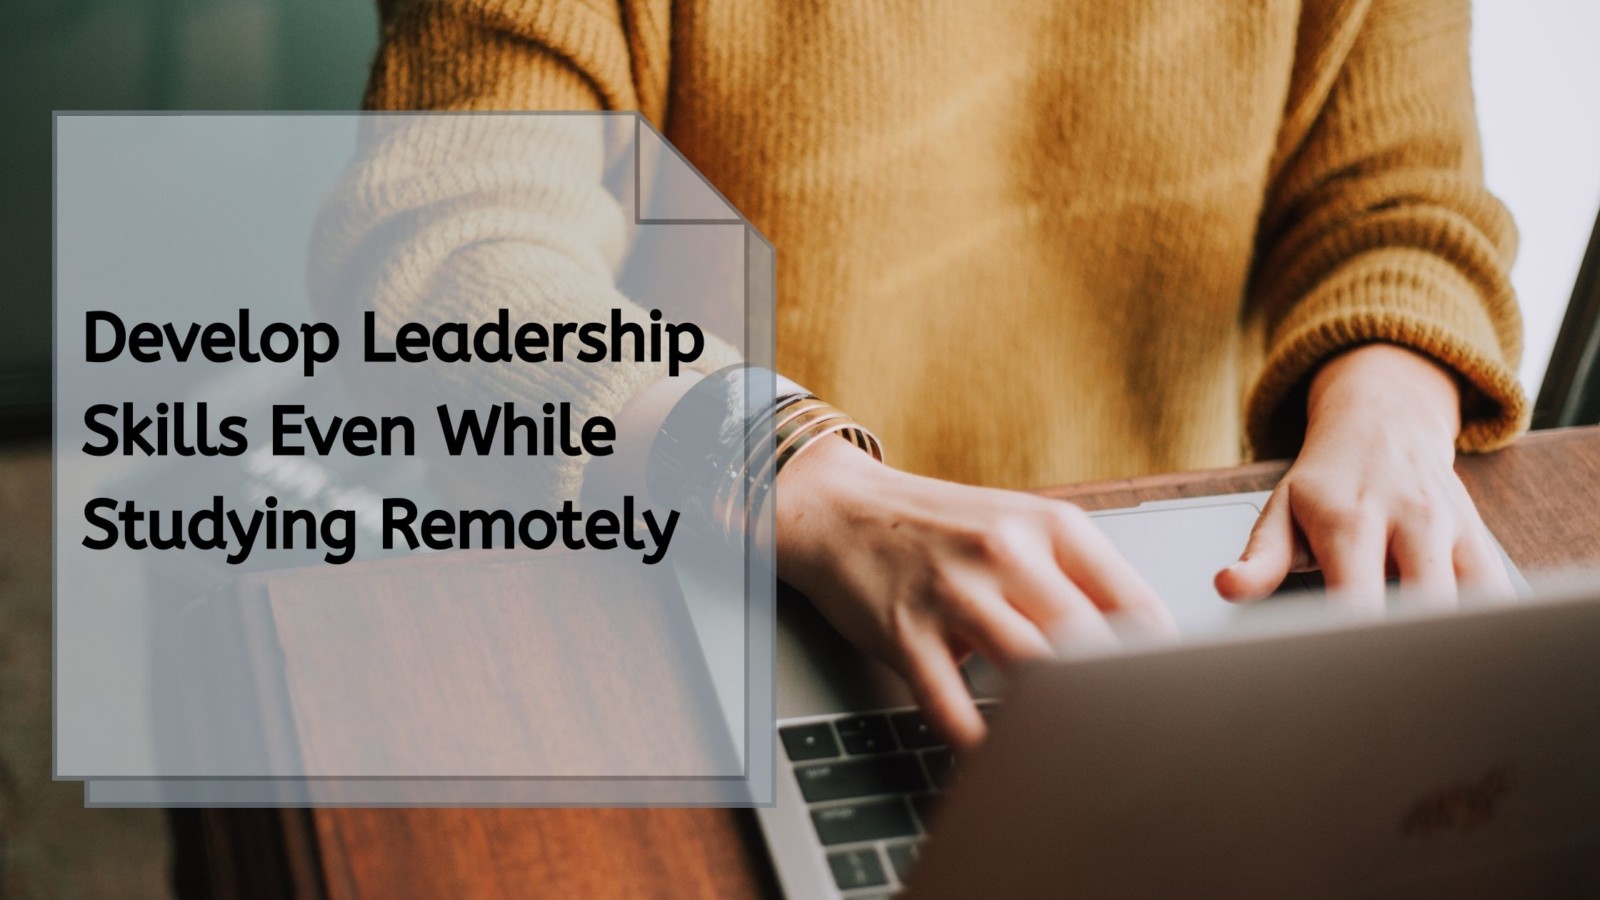 Develop Leadership Skills Even While Studying Remotely